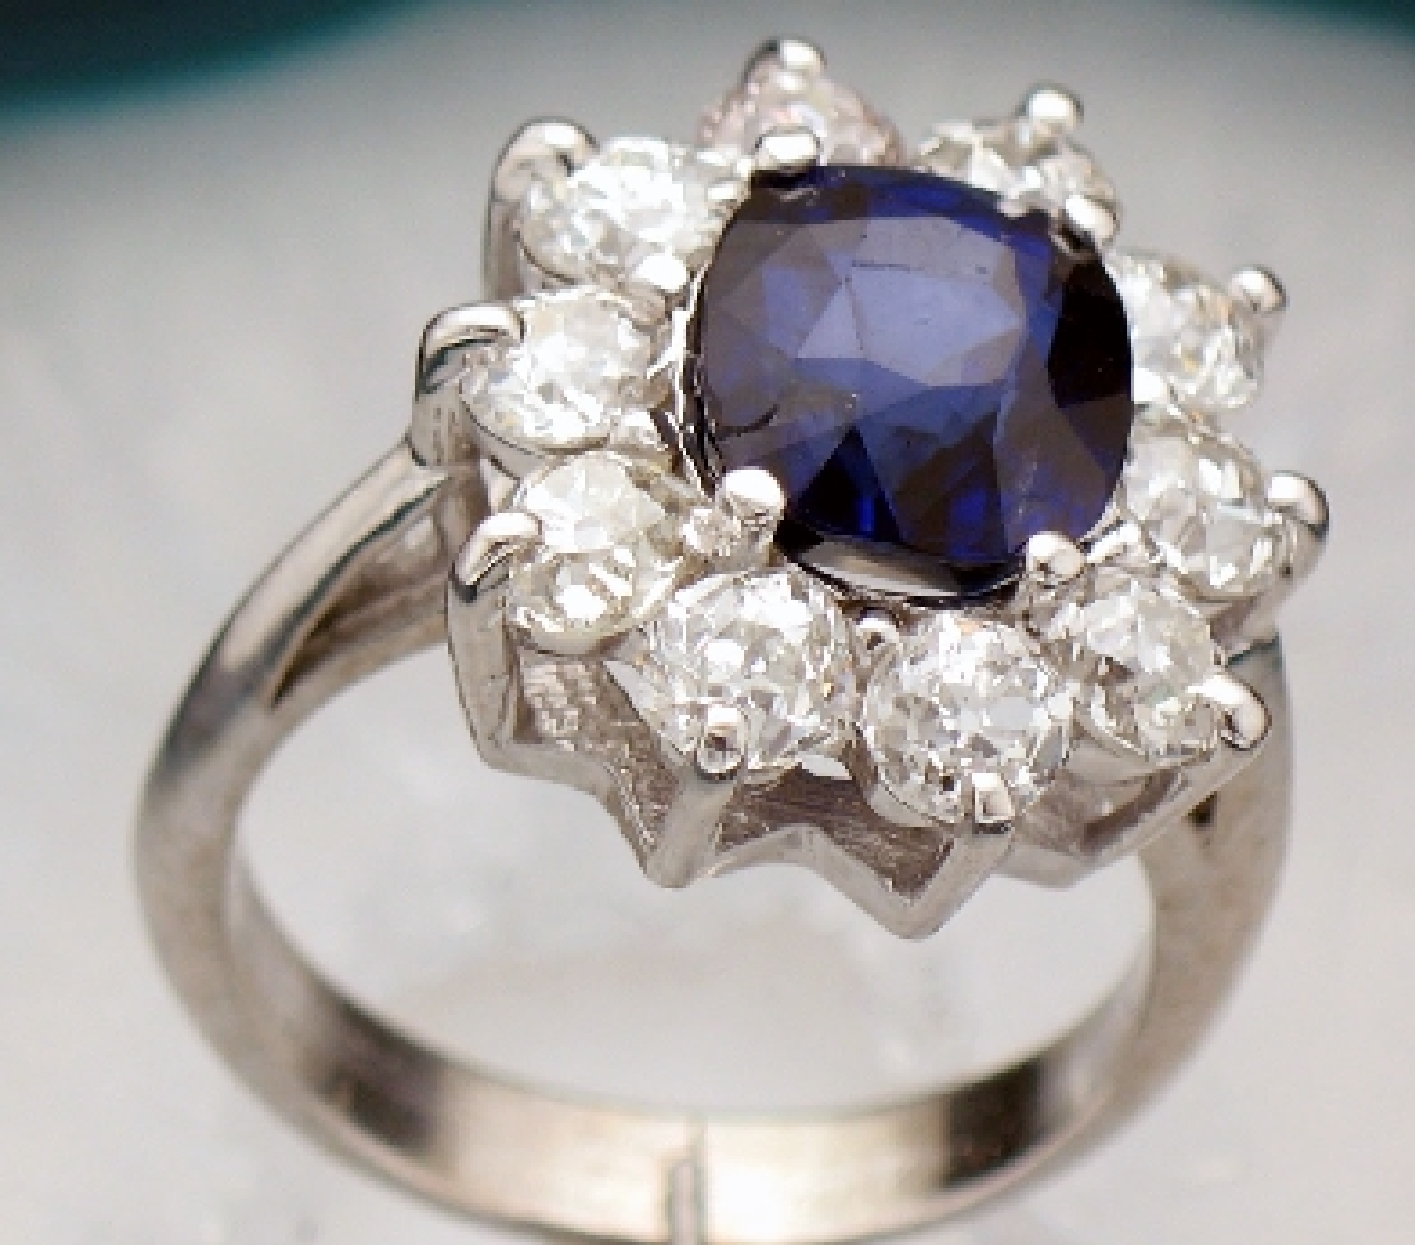 Princess Di ring with round sapphire and bordering diamonds.